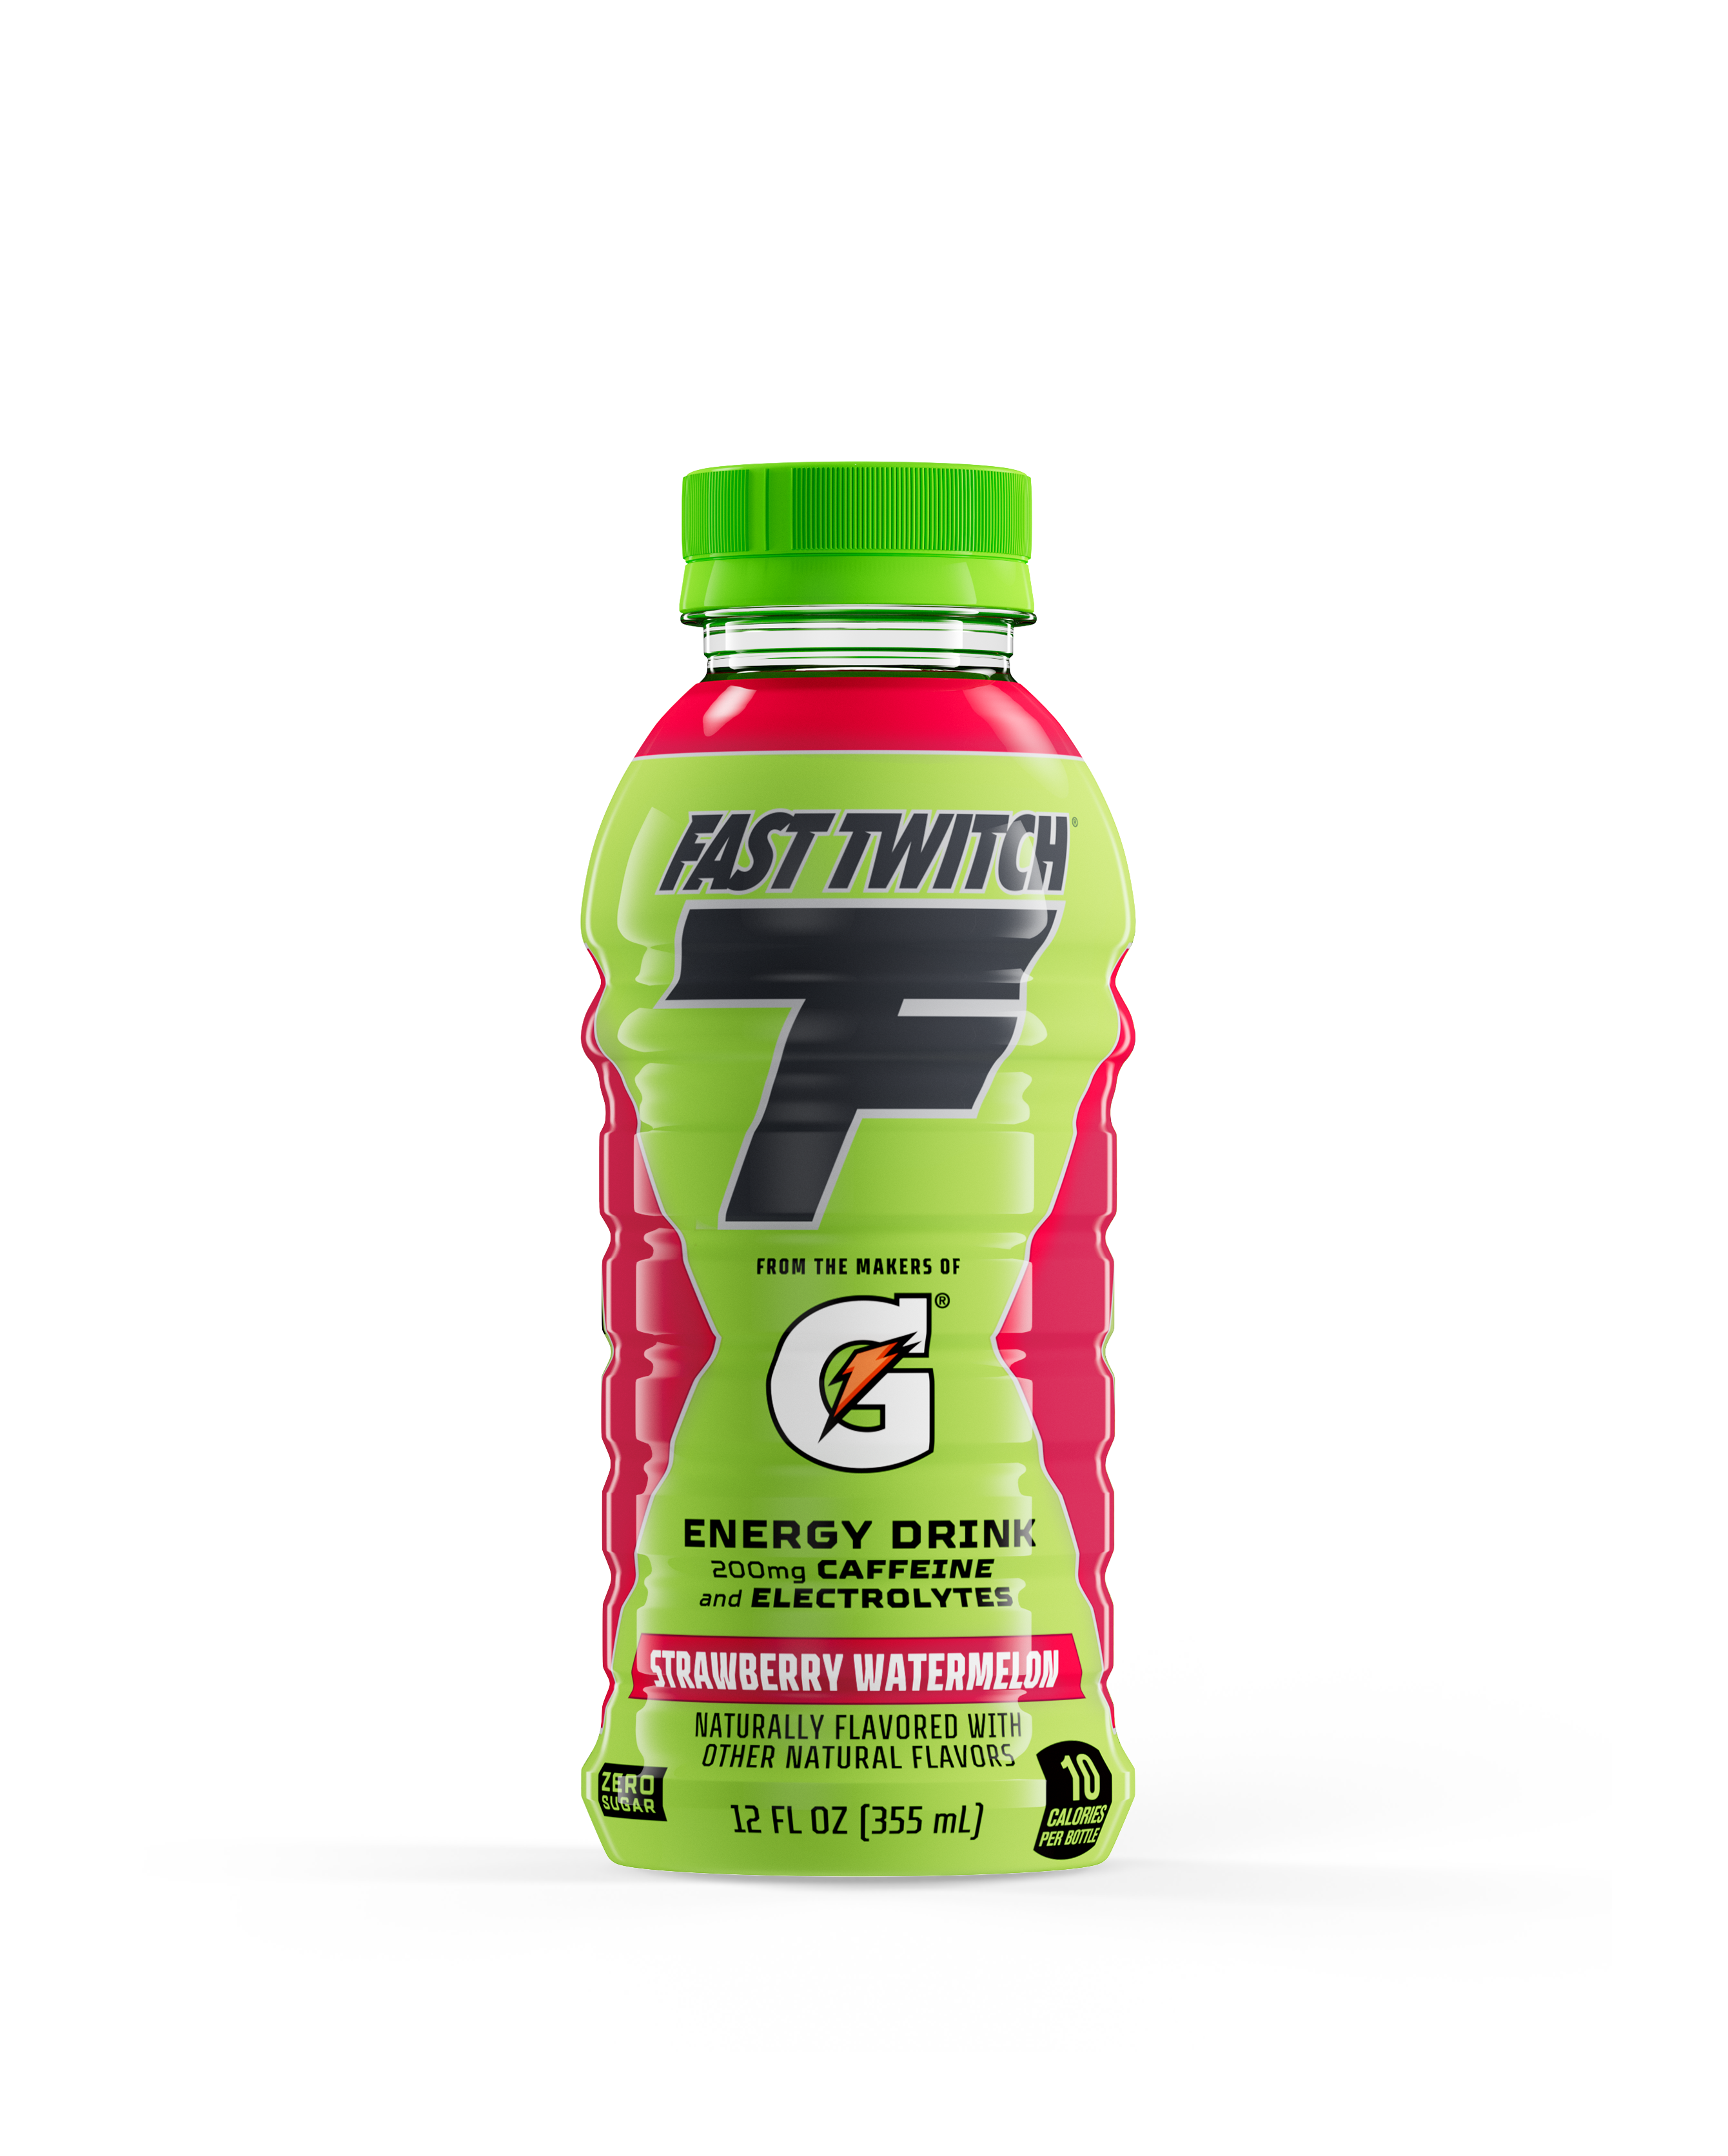 Fast Twitch ready to drink Stawberry Watermelon